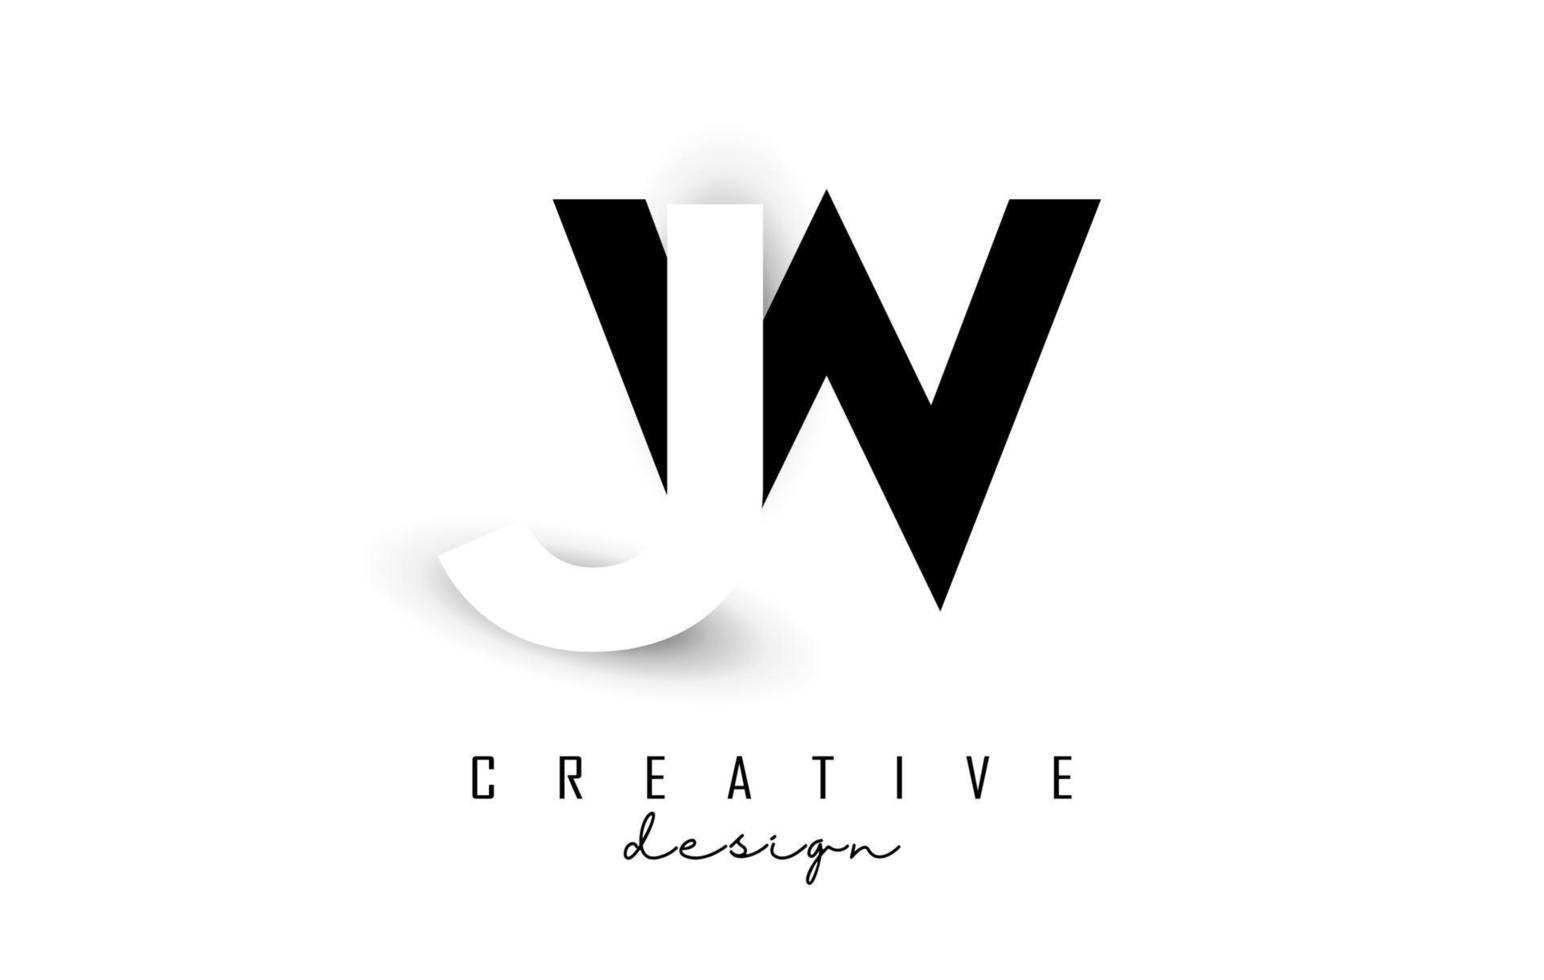 JW letters Logo with negative space design. Vector illustration with with geometric typography.